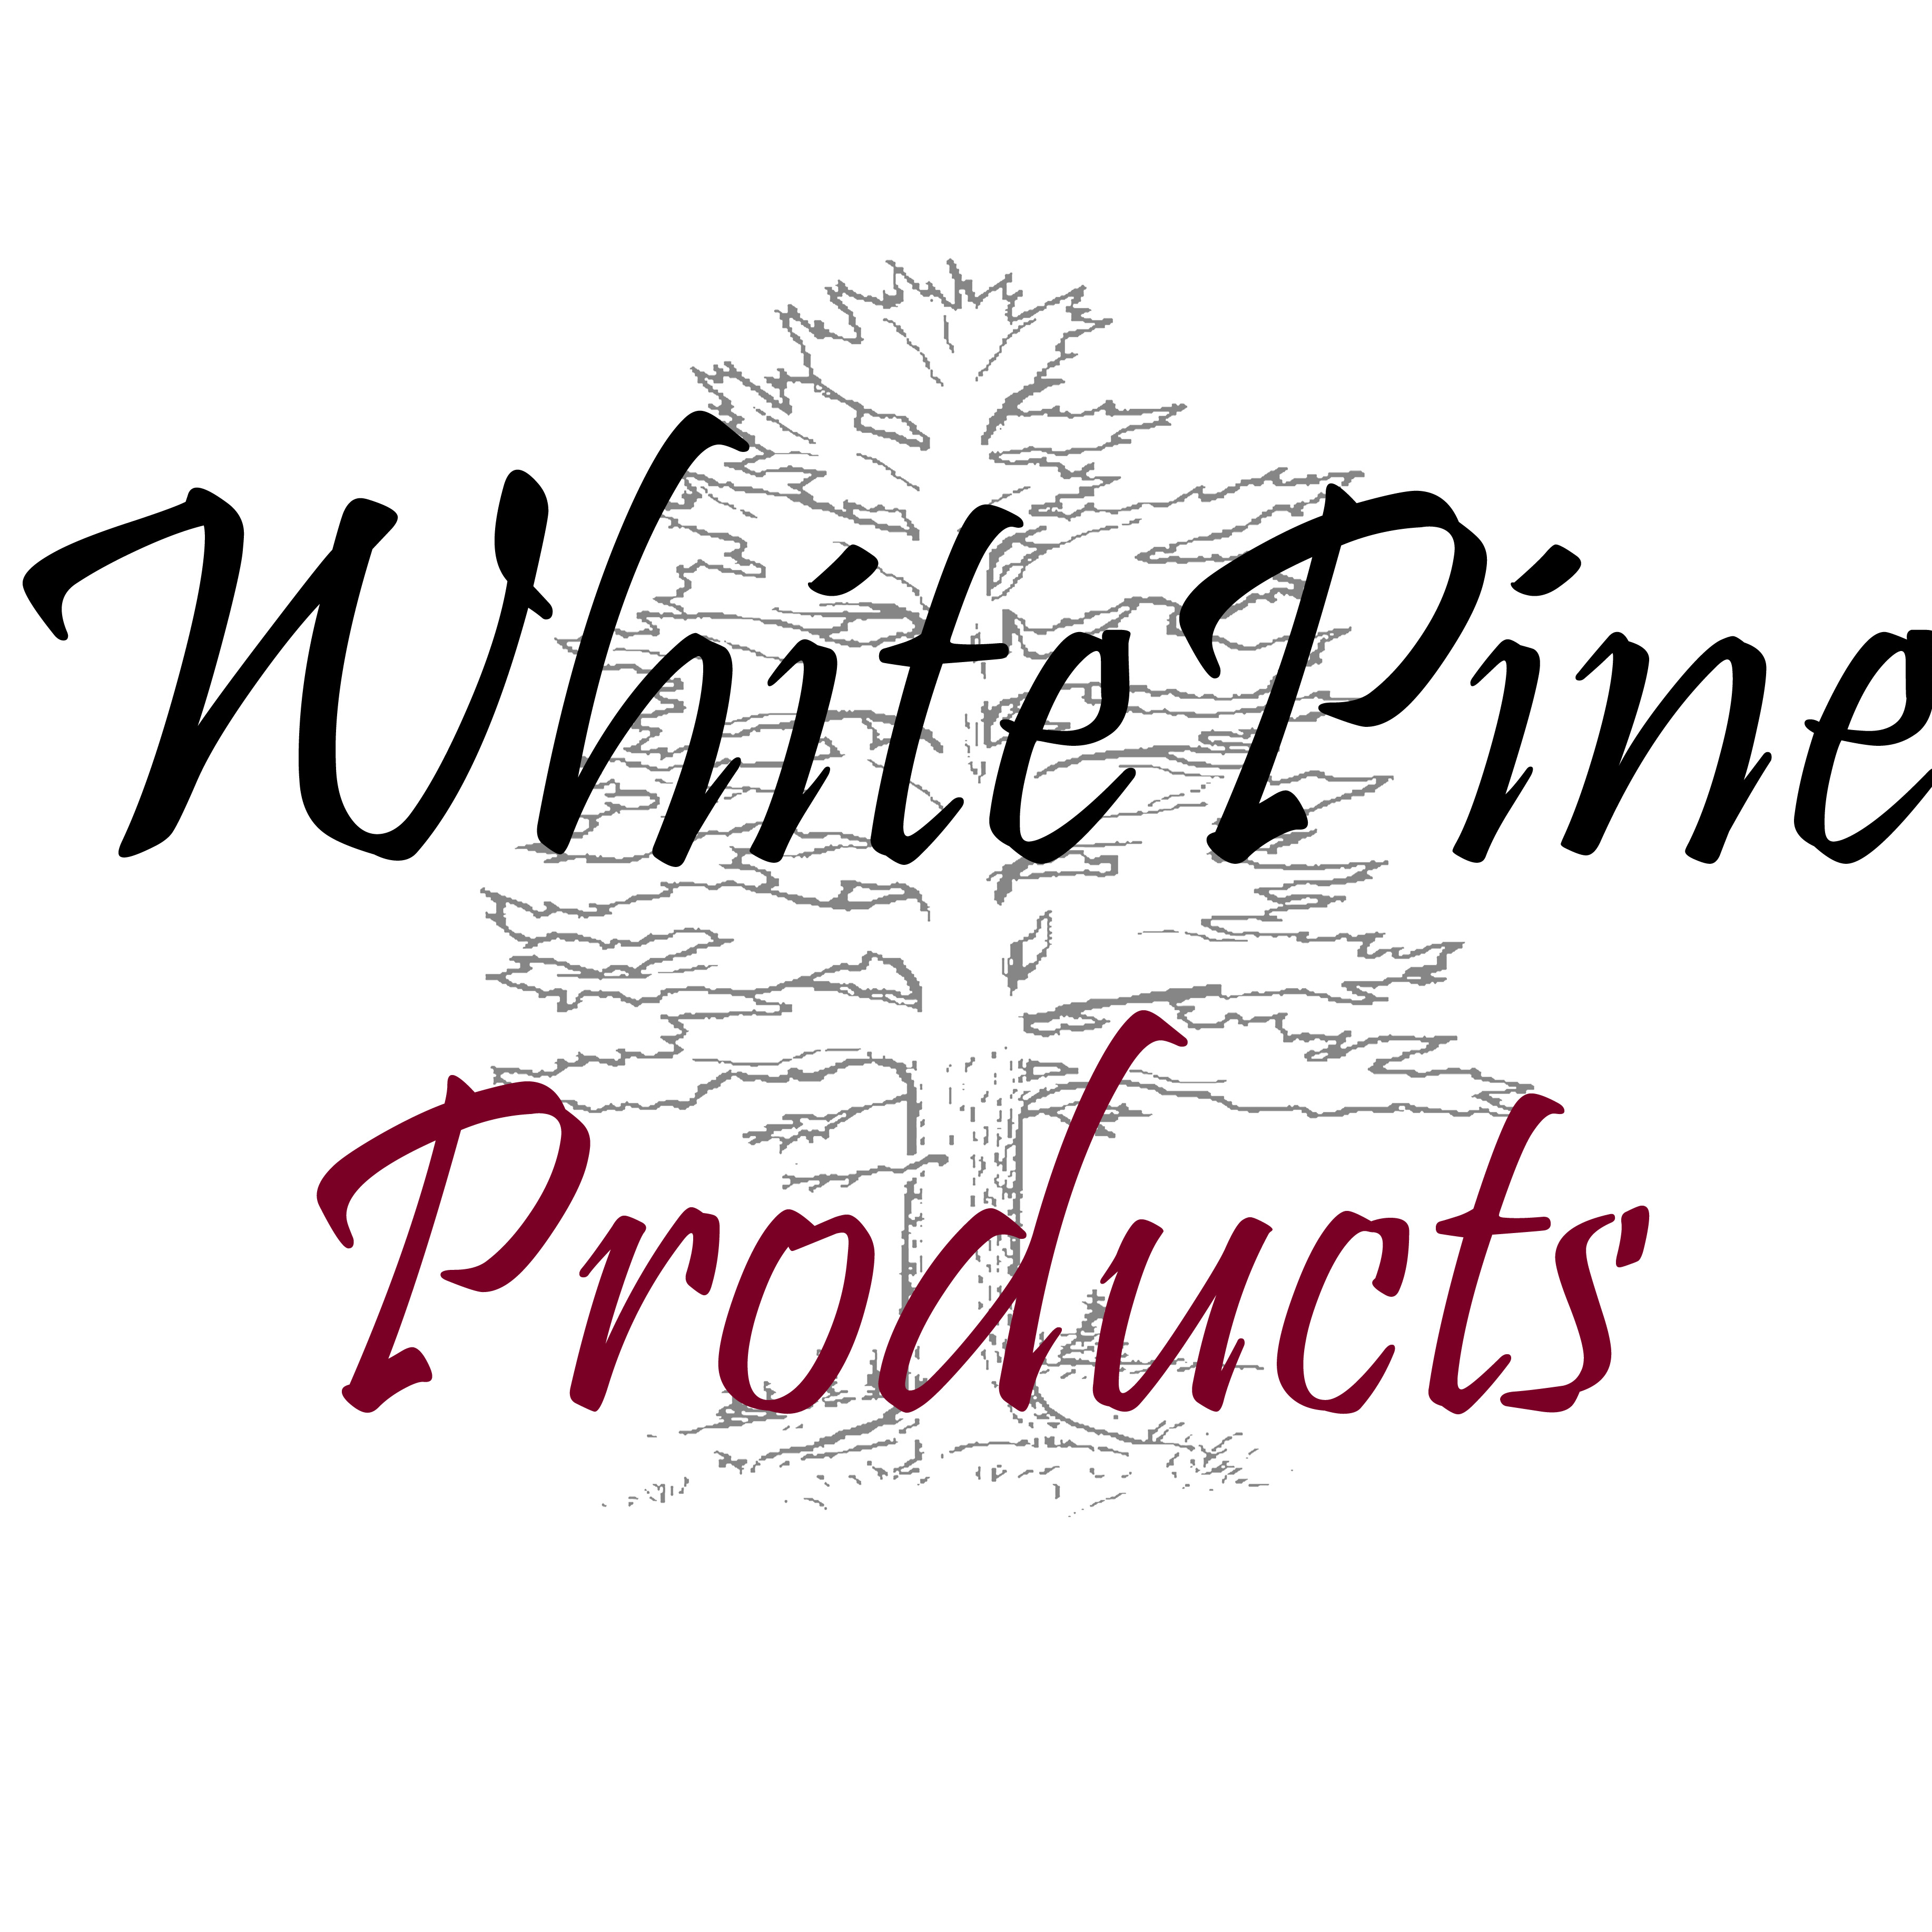 White Pine Products